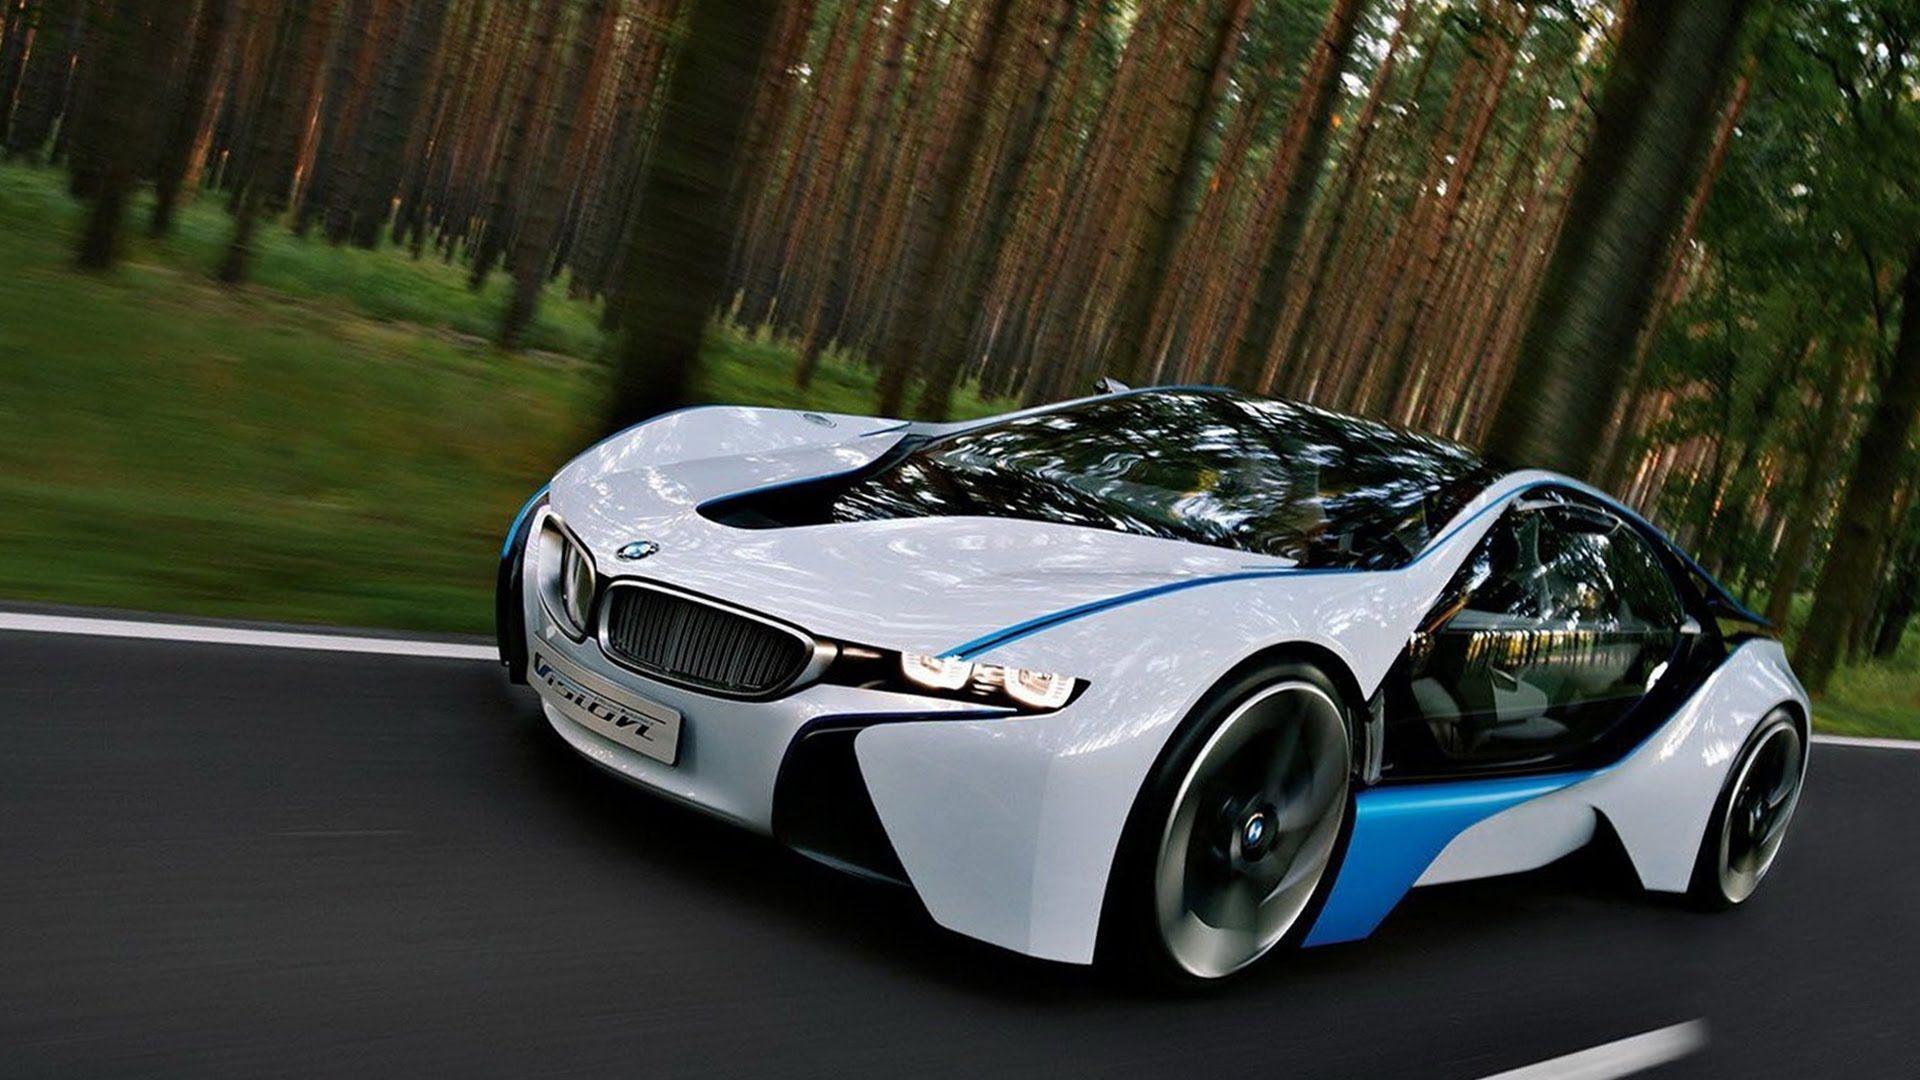 Bmw I8 Wallpapers Top Free Bmw I8 Backgrounds Wallpaperaccess